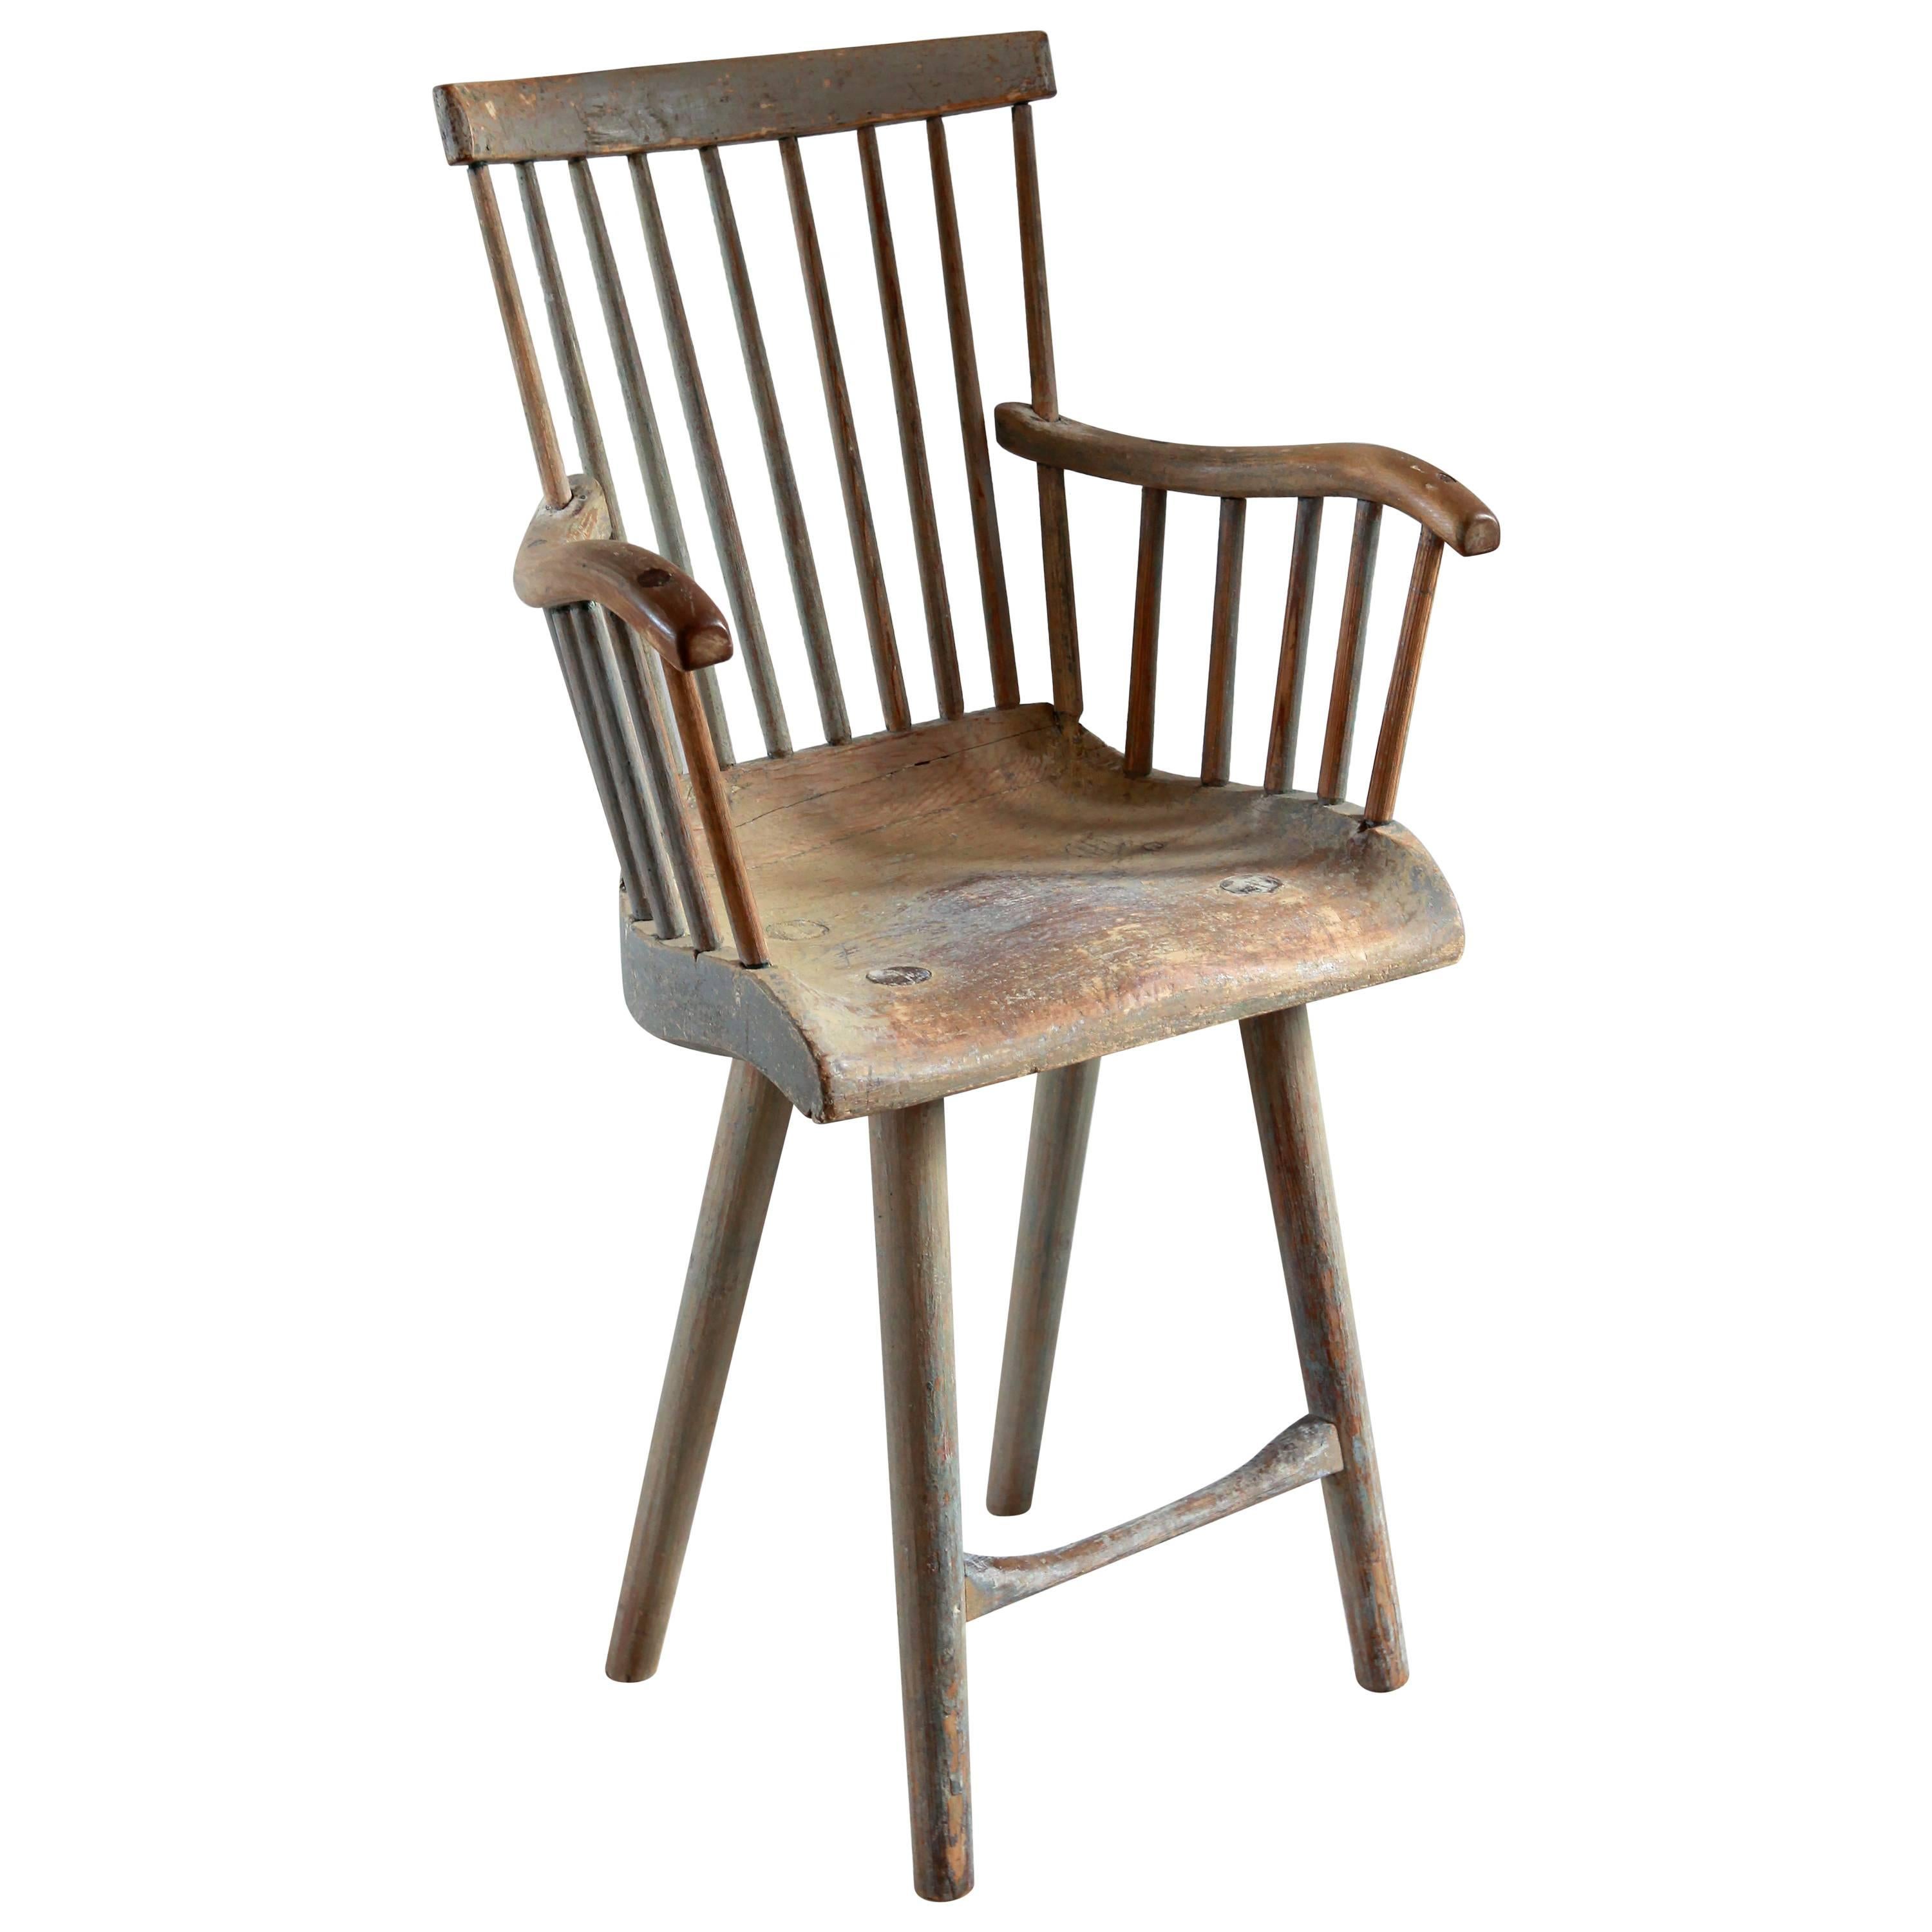 Tall Primitive Spindle Side Chair